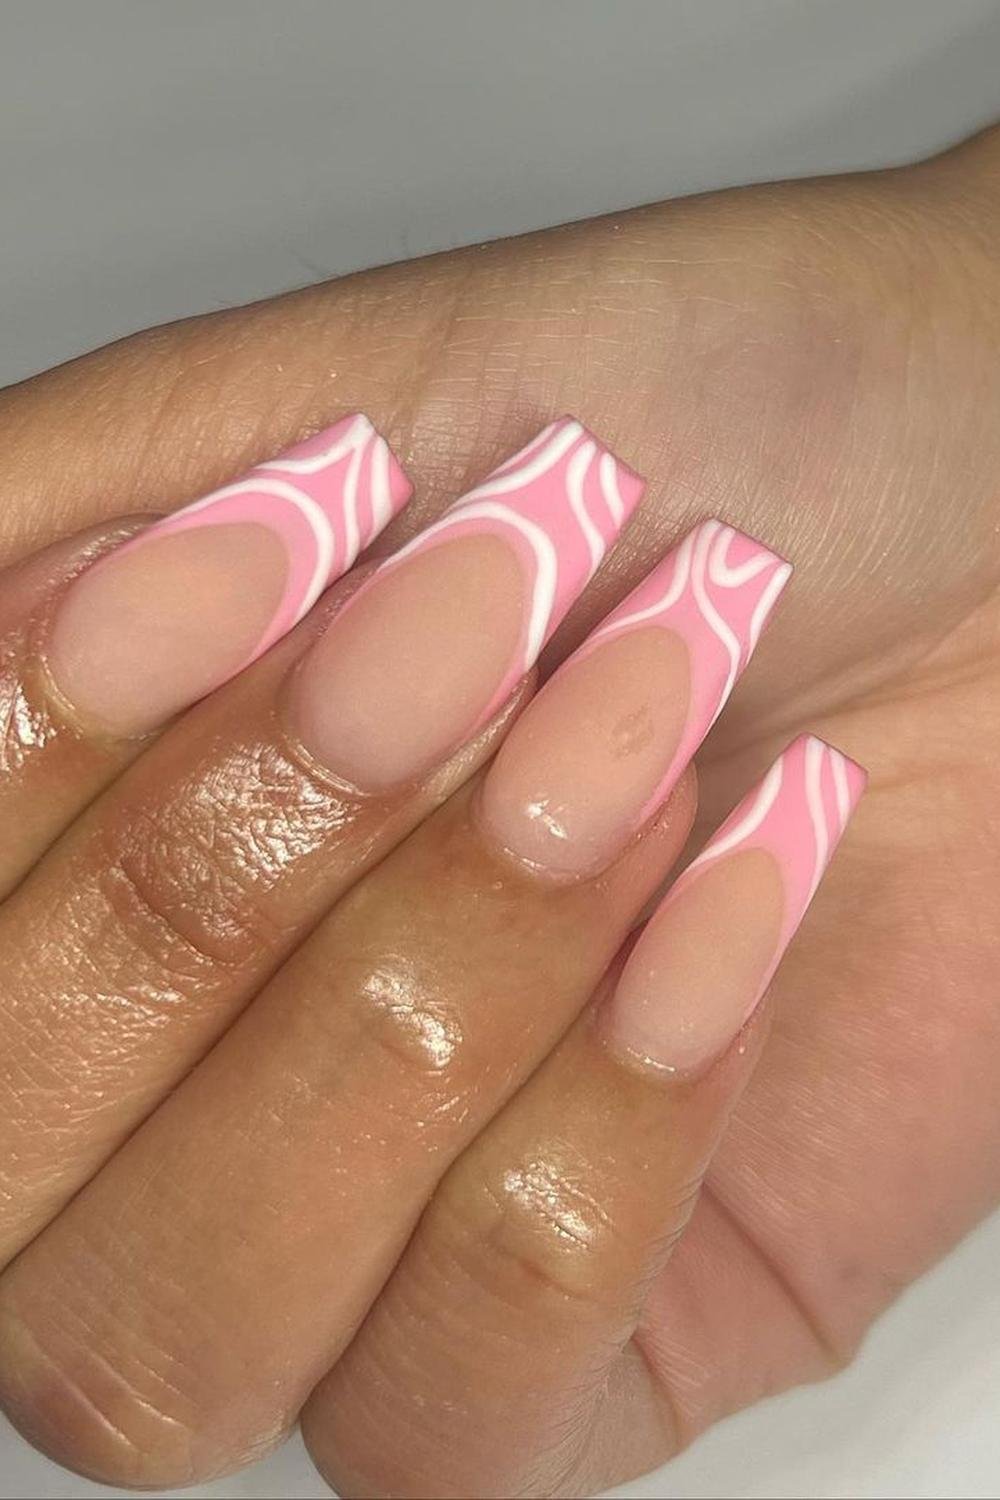 4 - Picture of Ballerina Nails